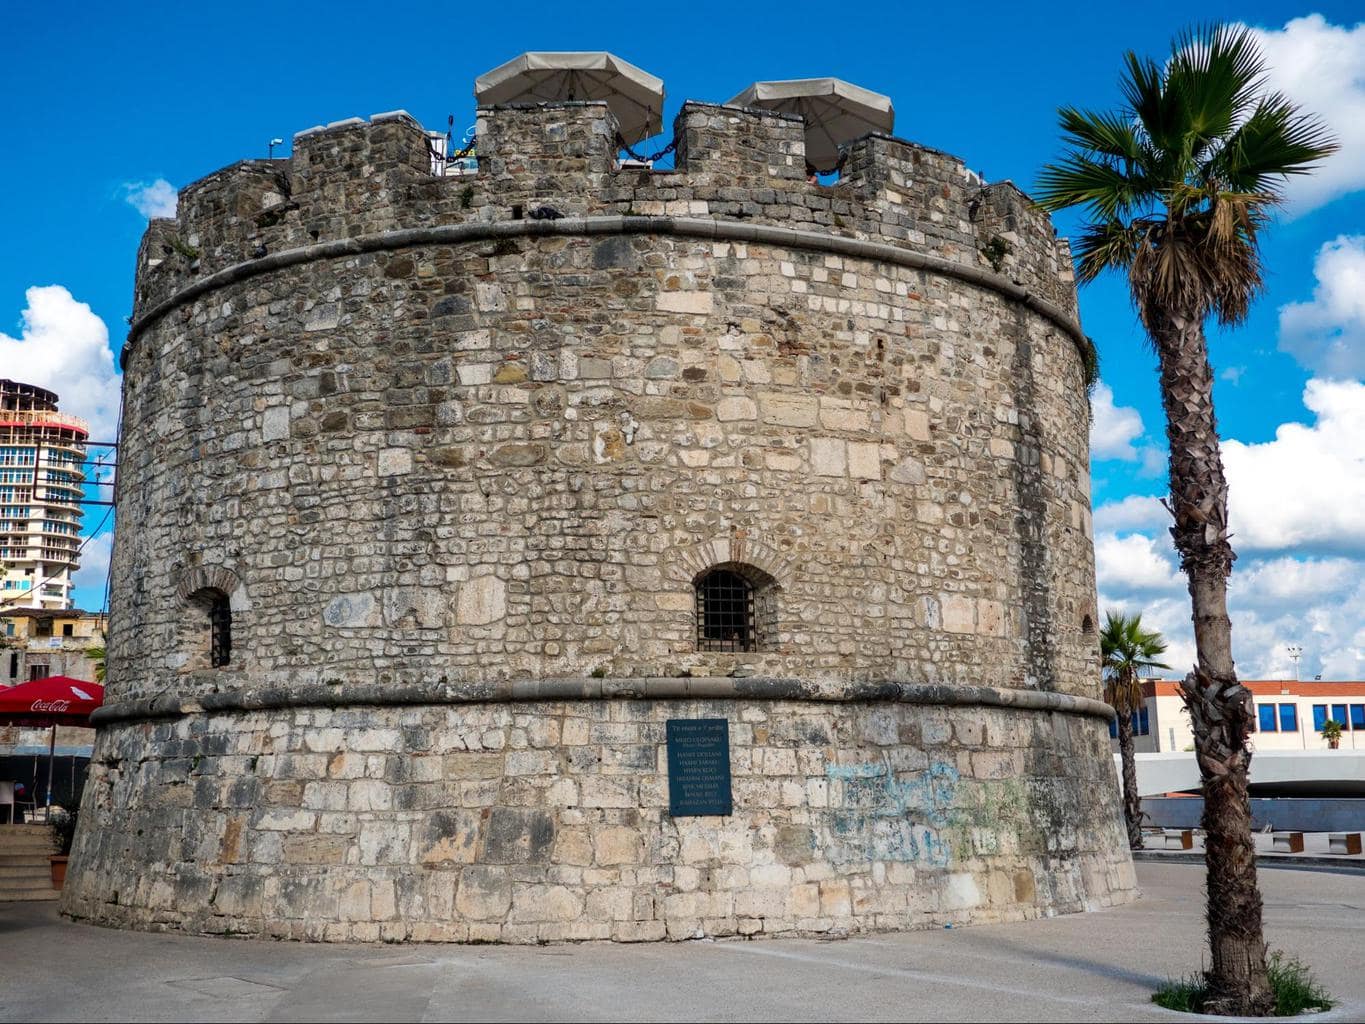 The Venetian Tower of Durres